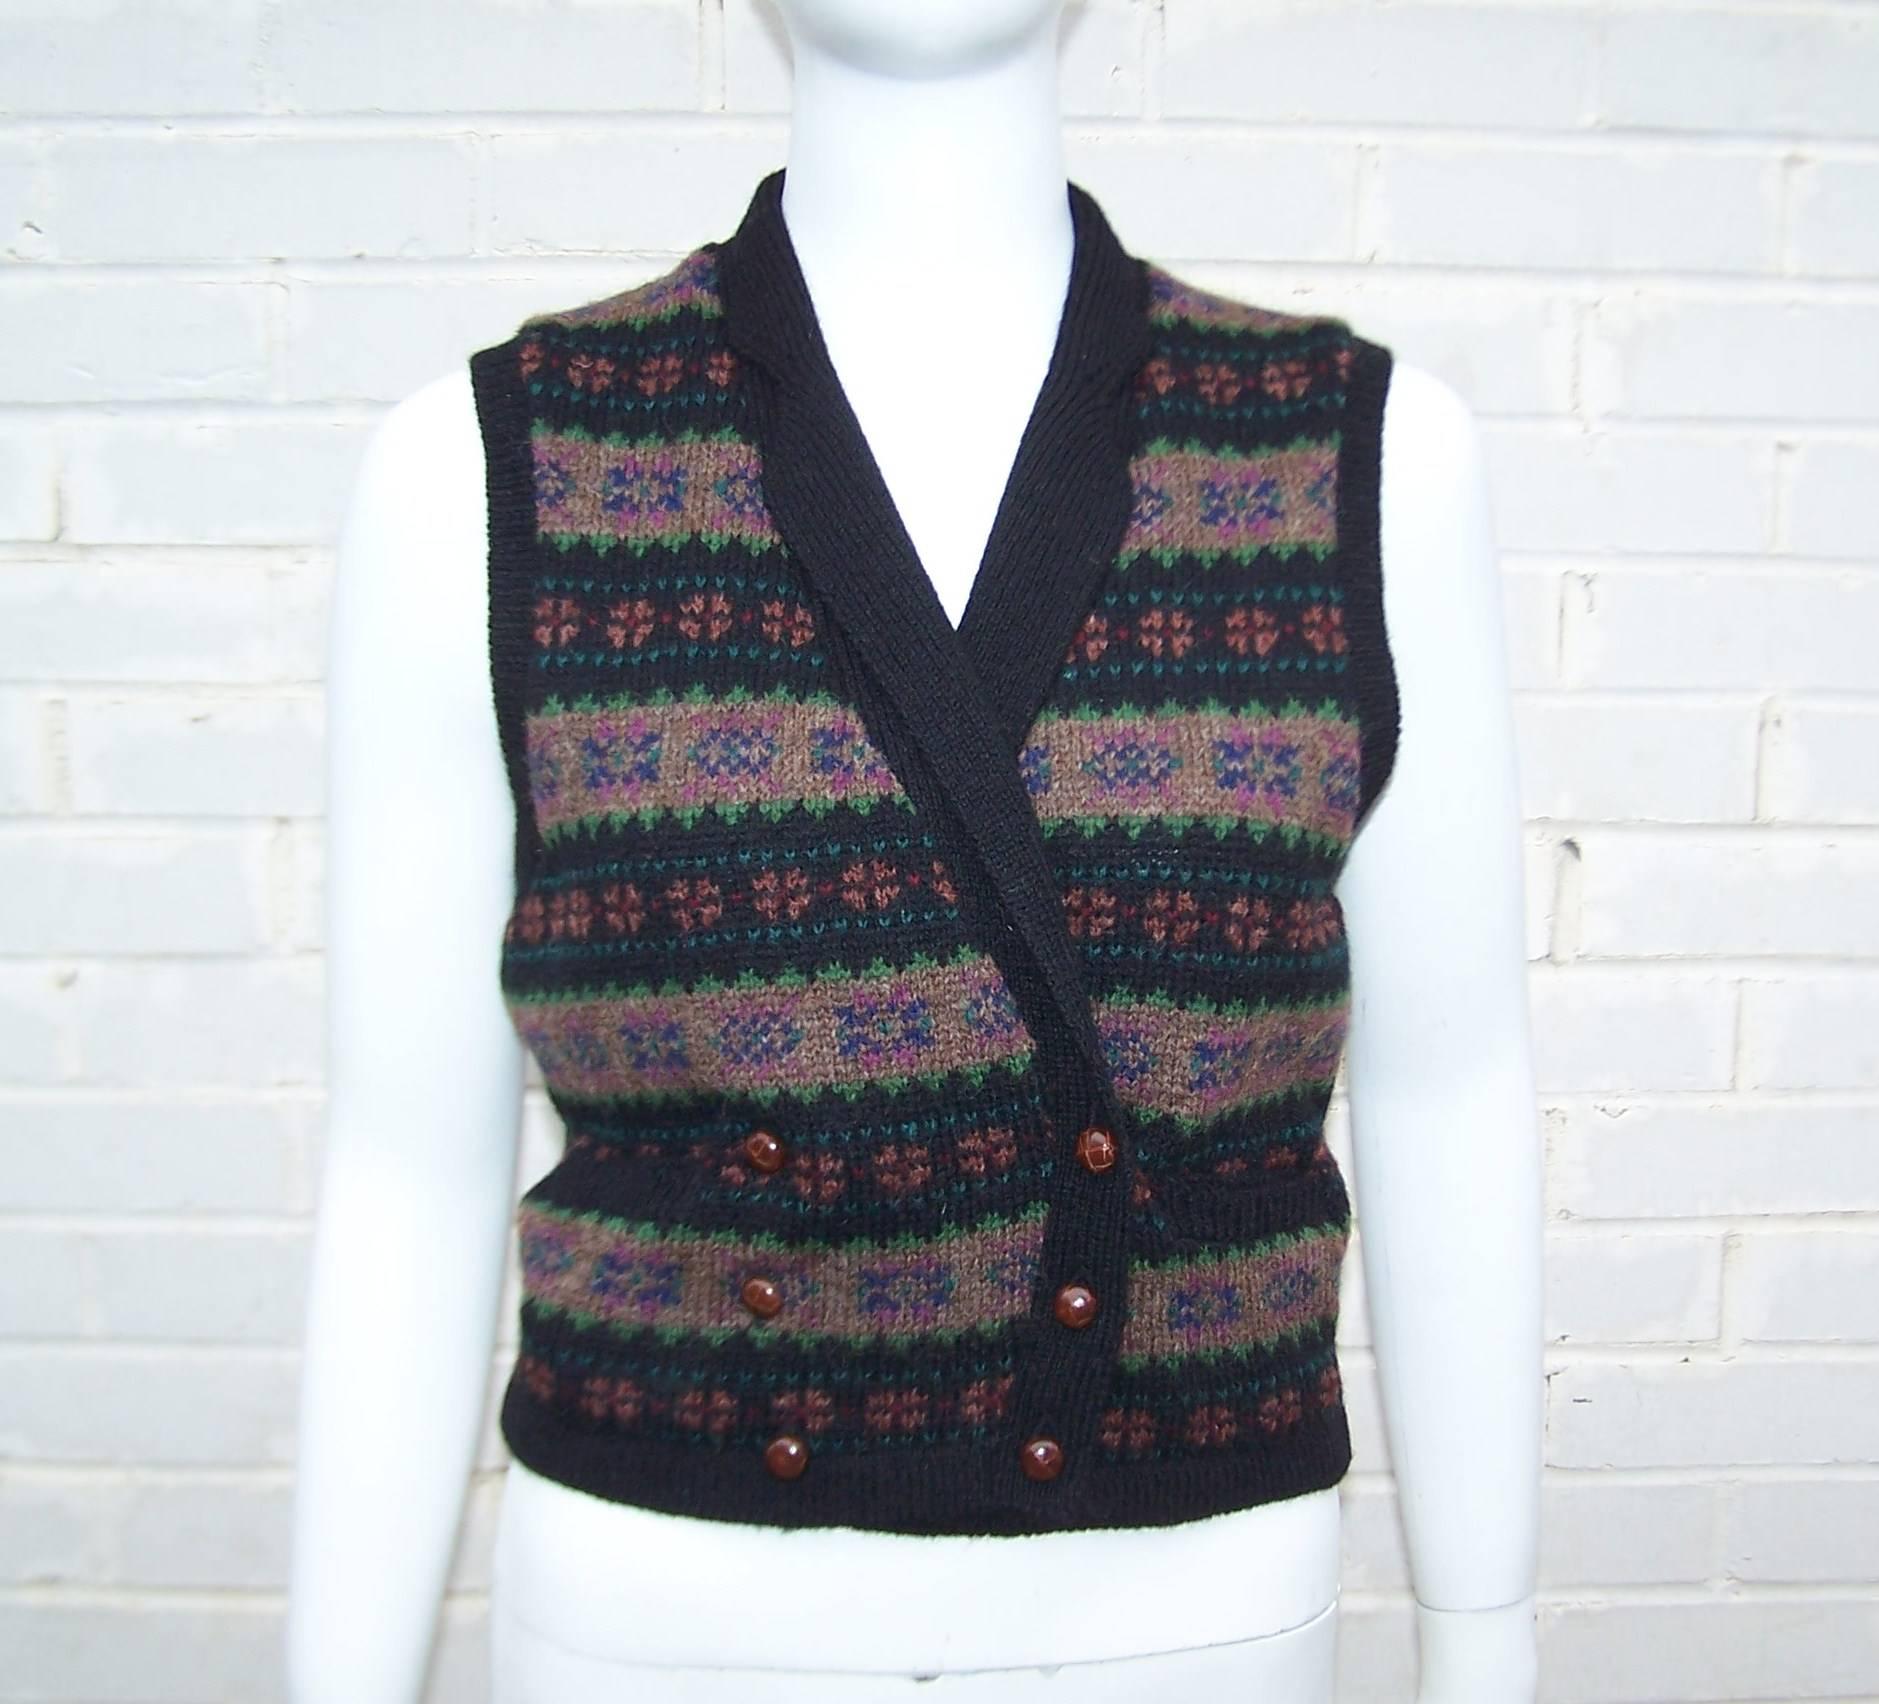 Add a charming finishing touch to your ensemble with this 1970's Ralph Lauren sweater vest designed with waistcoat styling.  Vests are always an interesting  touch and a great way to add a menswear influence to your look...not to mention a little